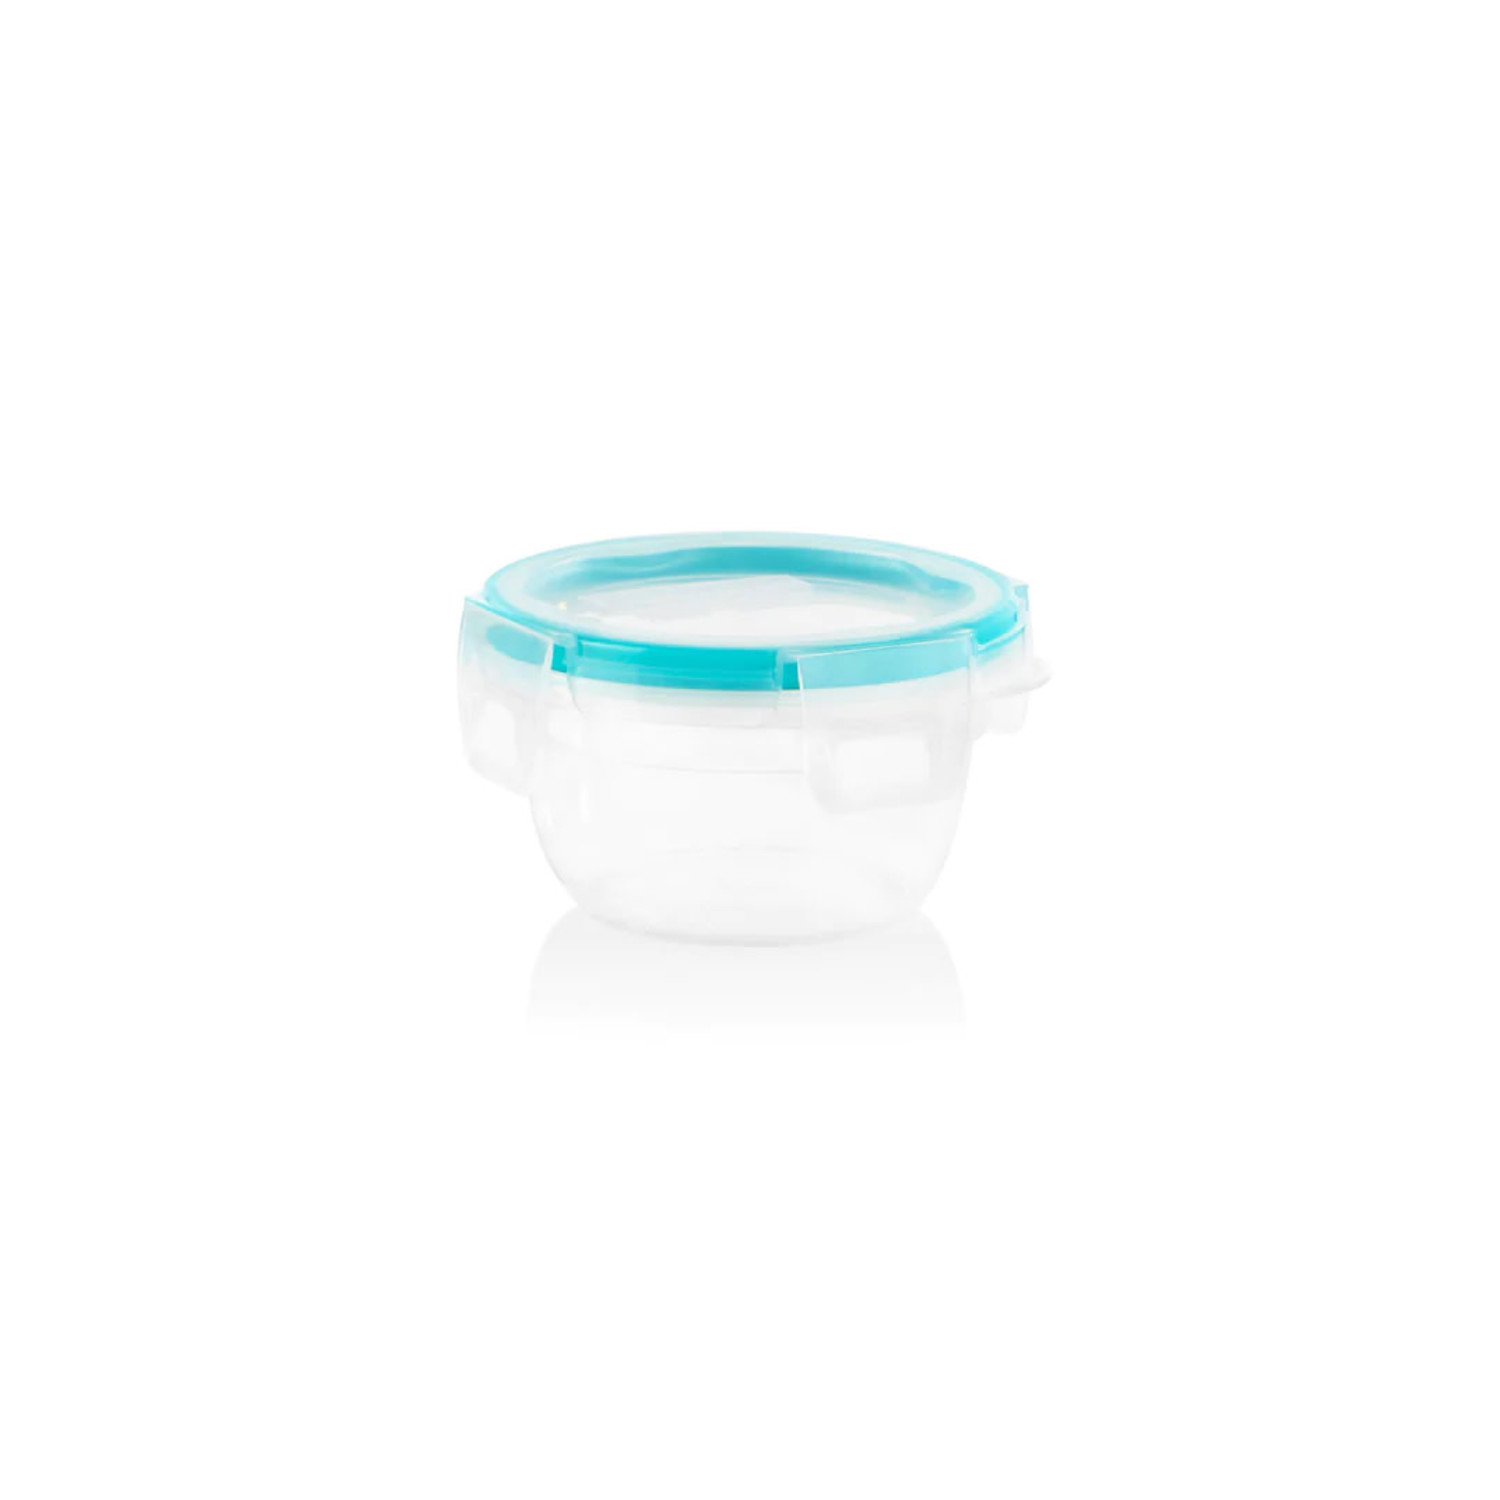 OXO 1.6 Cup SNAP Glass Rectangle Container